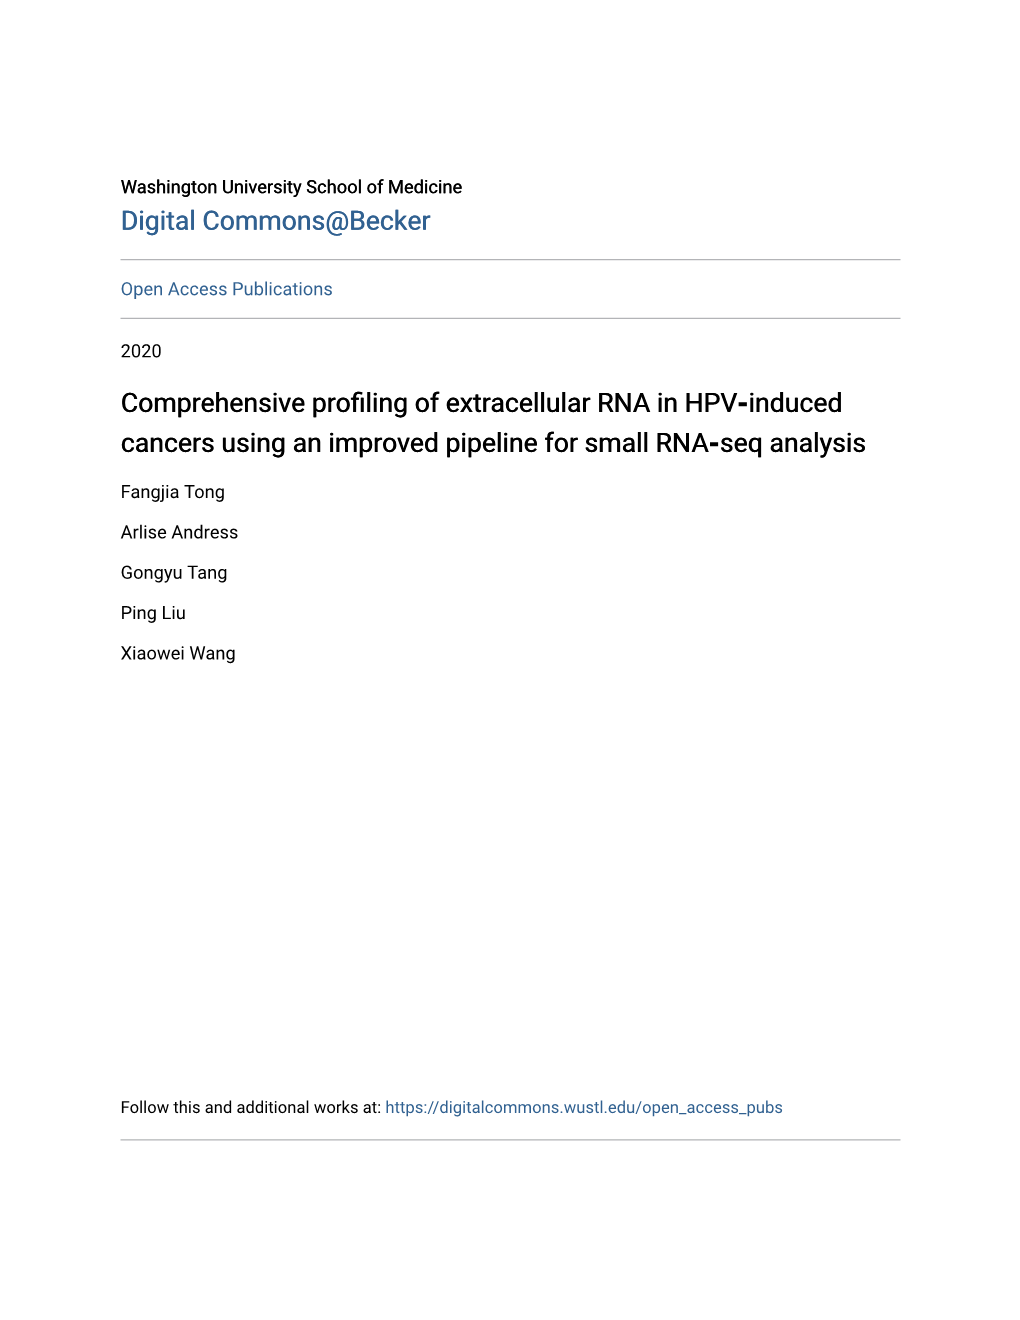 Comprehensive Profiling of Extracellular RNA in HPV‑Induced Cancers Using an Improved Pipeline for Small RNA‑Seq Analysis